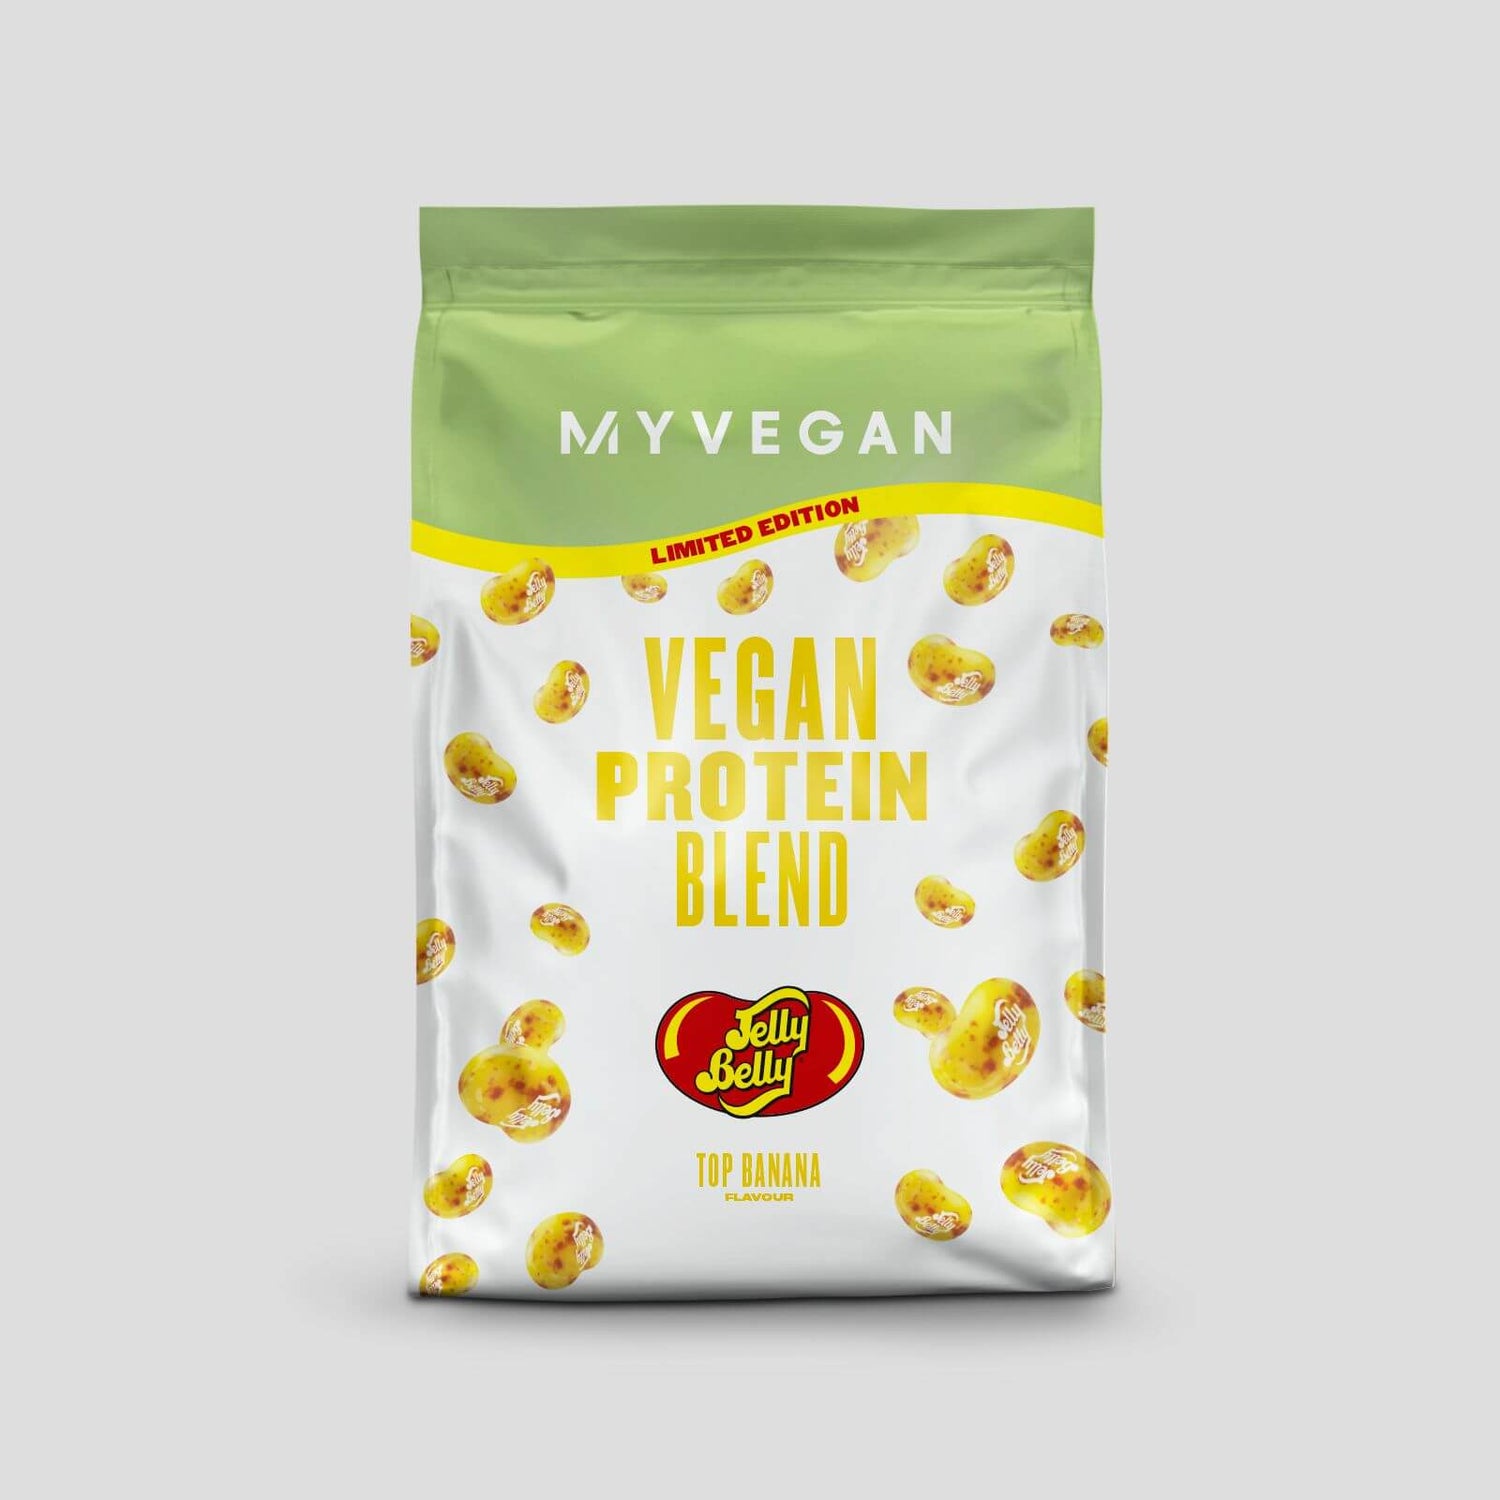 Vegan Protein Blend – Limited Edition Jelly Belly - Top Banana